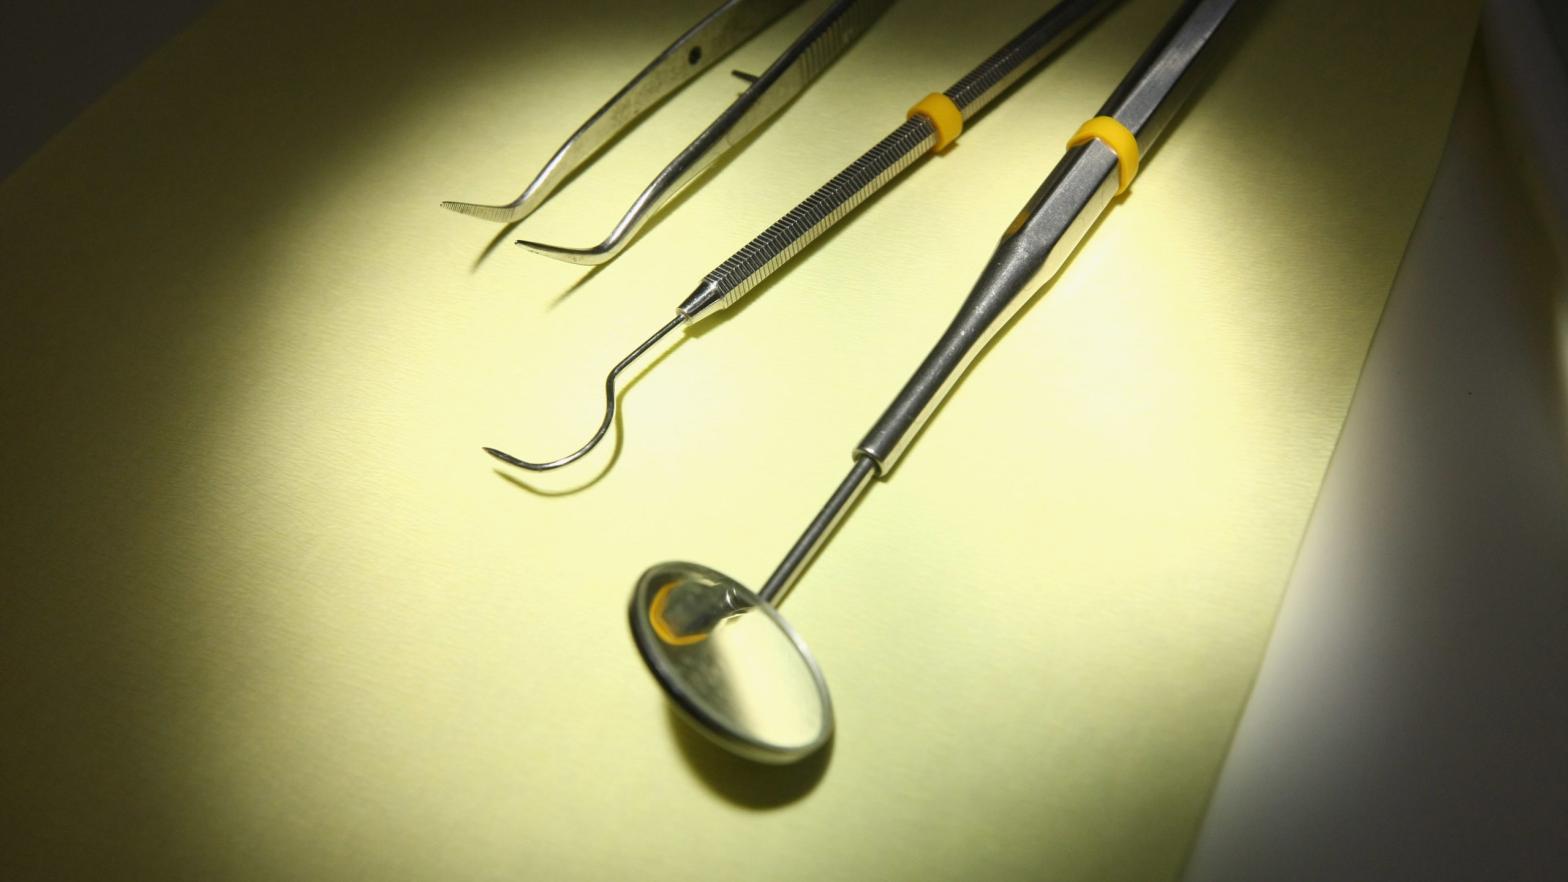 File photo of dental instruments (Photo: Sean Gallup, Getty Images)